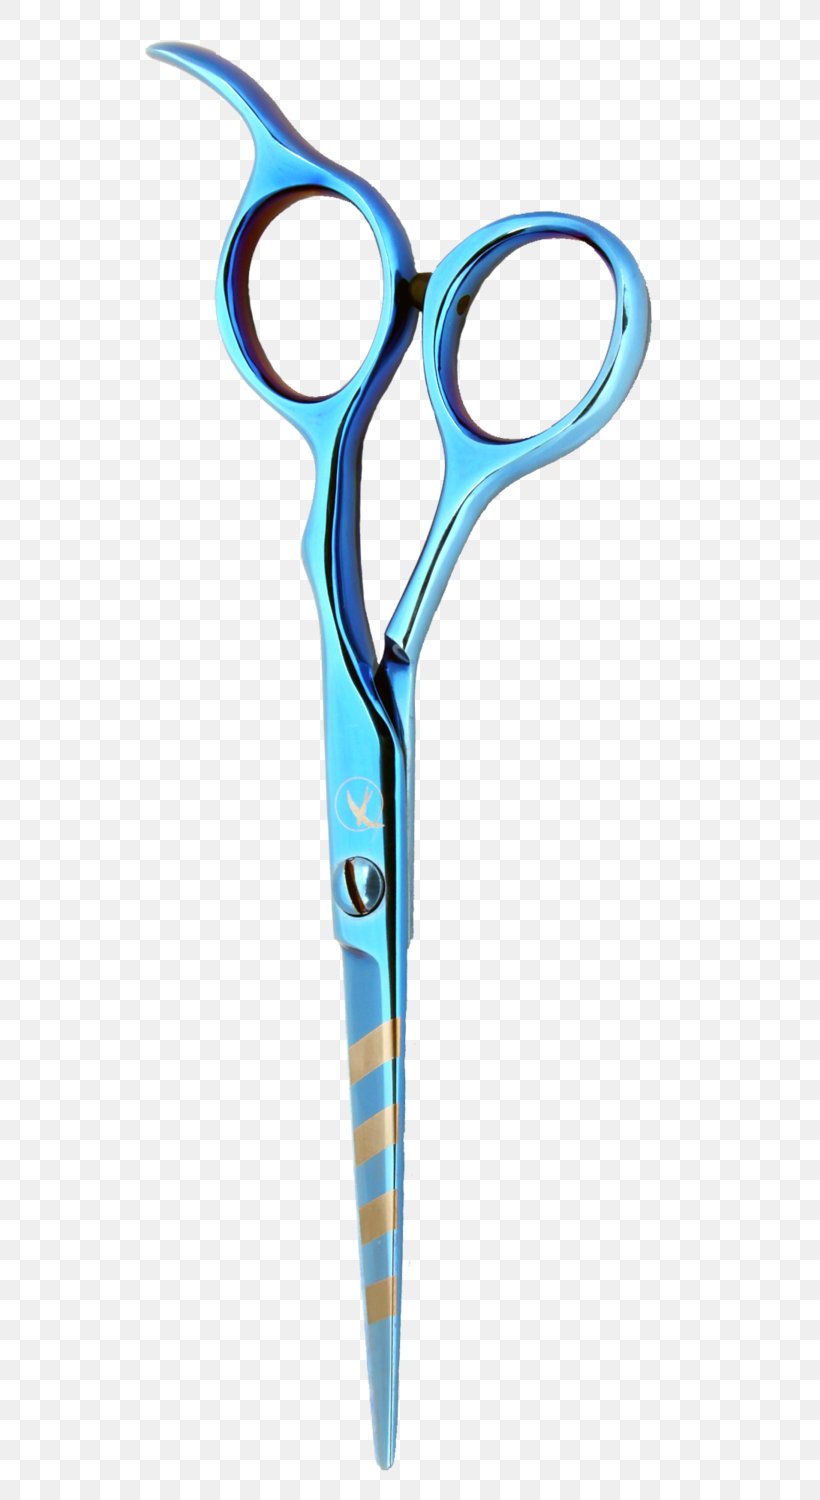 Scissors Hair-cutting Shears Hair Care, PNG, 562x1500px, Scissors, Hair, Hair Care, Hair Shear, Haircutting Shears Download Free